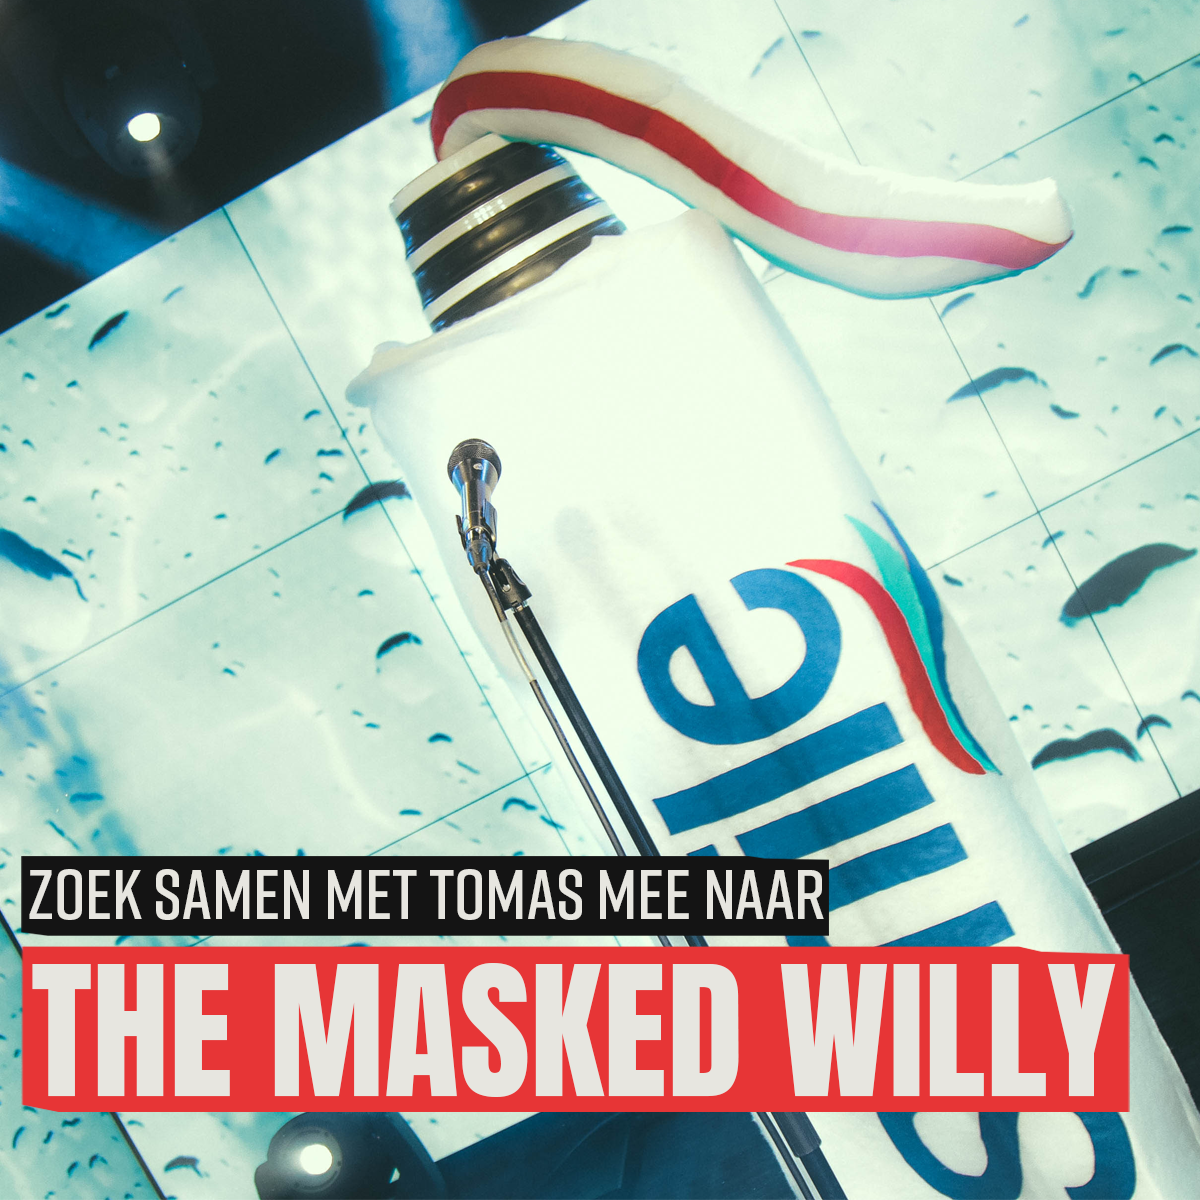 Visual masked willy site vierkant